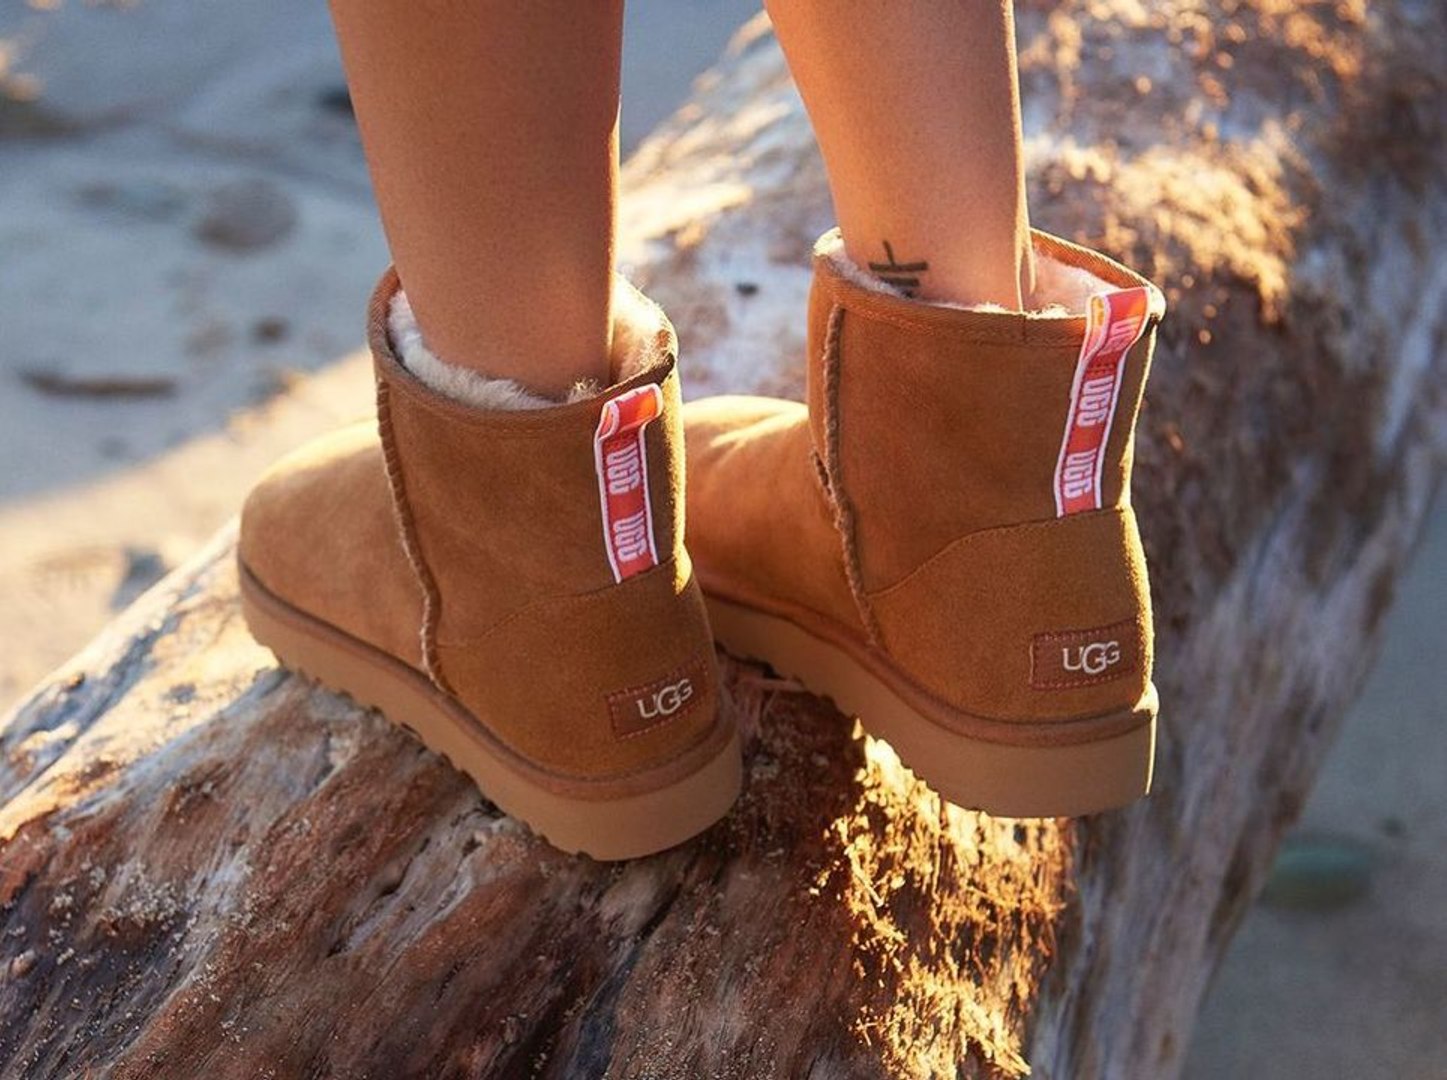 Ugg Boots Are Just $16 at This Secret Cyber Monday Sale - video Dailymotion